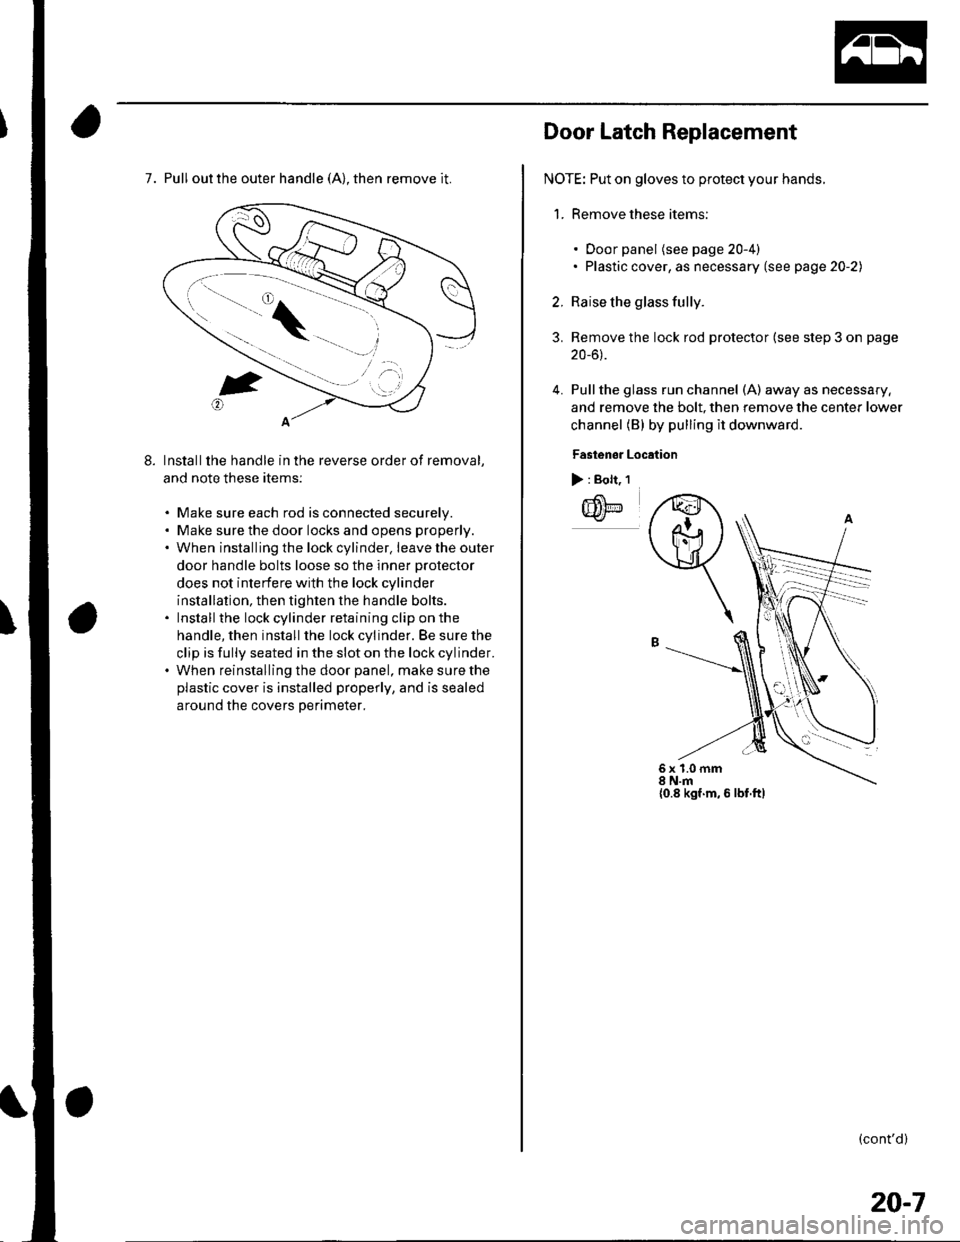 HONDA CIVIC 2003 7.G Workshop Manual 7. Pull out the outer handle (A), then remove it.
Installthe handle in the reverse order of removal,
and note these items:
. Make sure each rod is connected securelv.. Make sure the door locks and ope